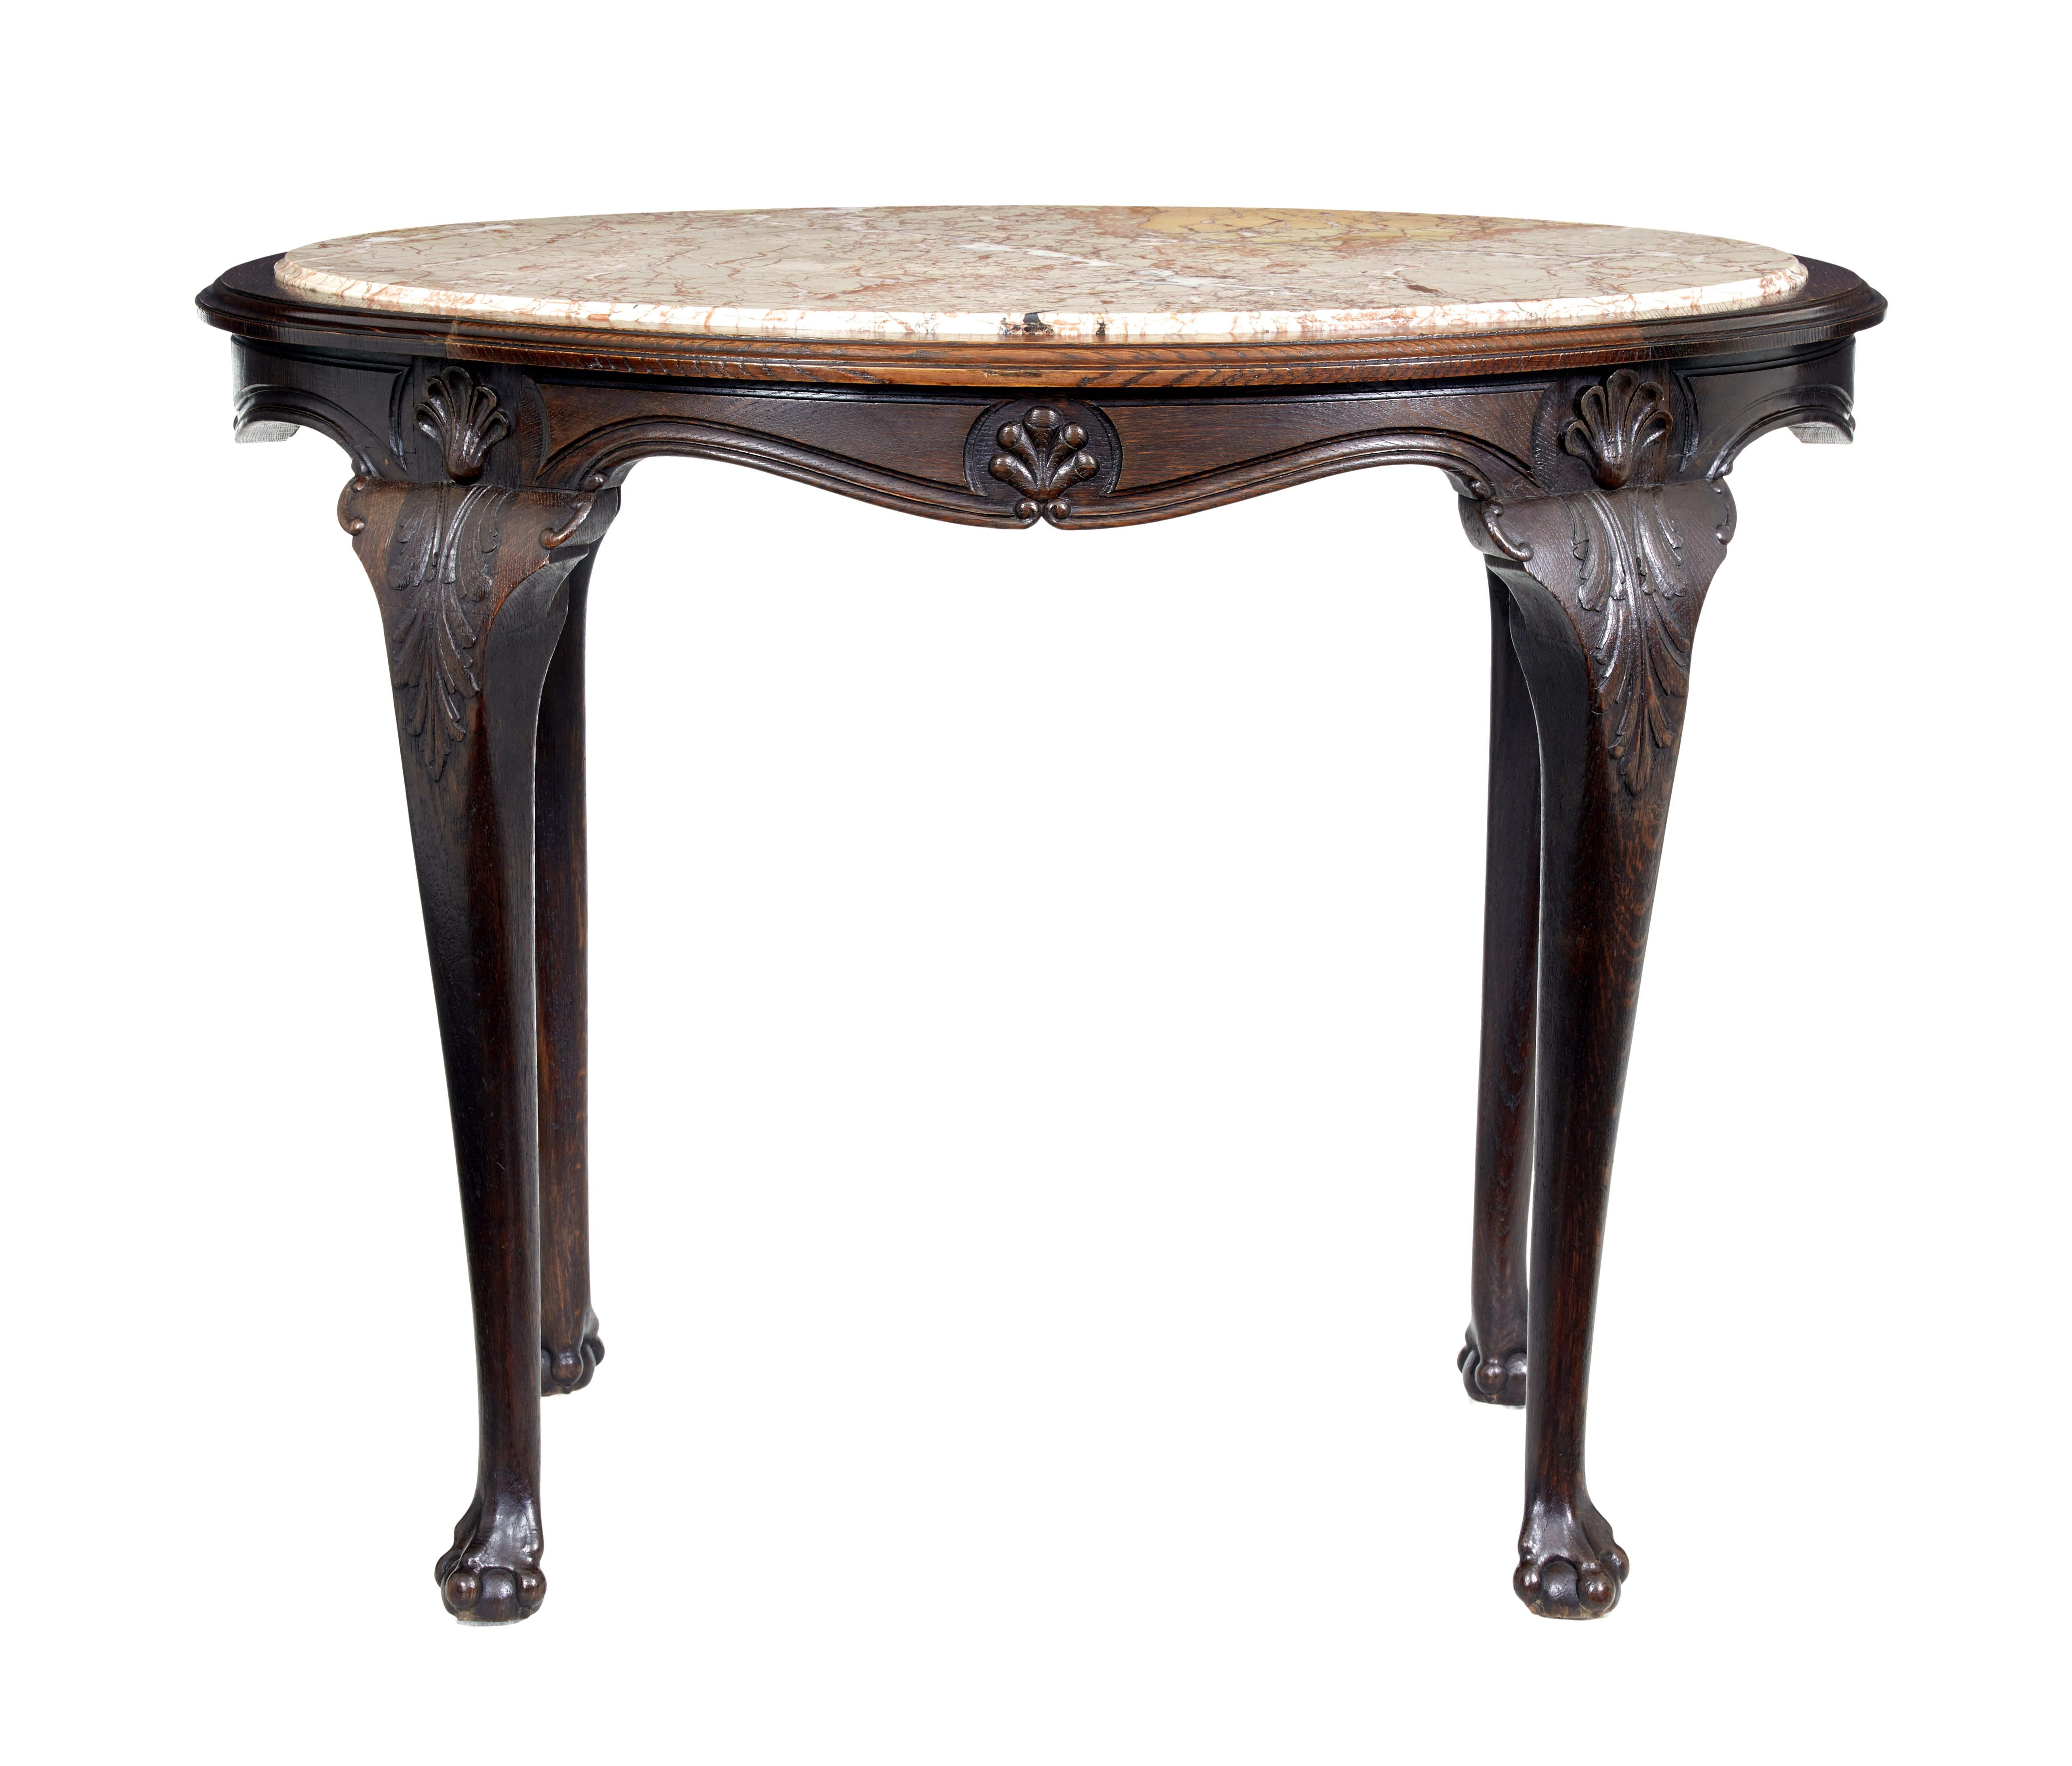 19th Century 19th century French art nouveau oak marble top table For Sale